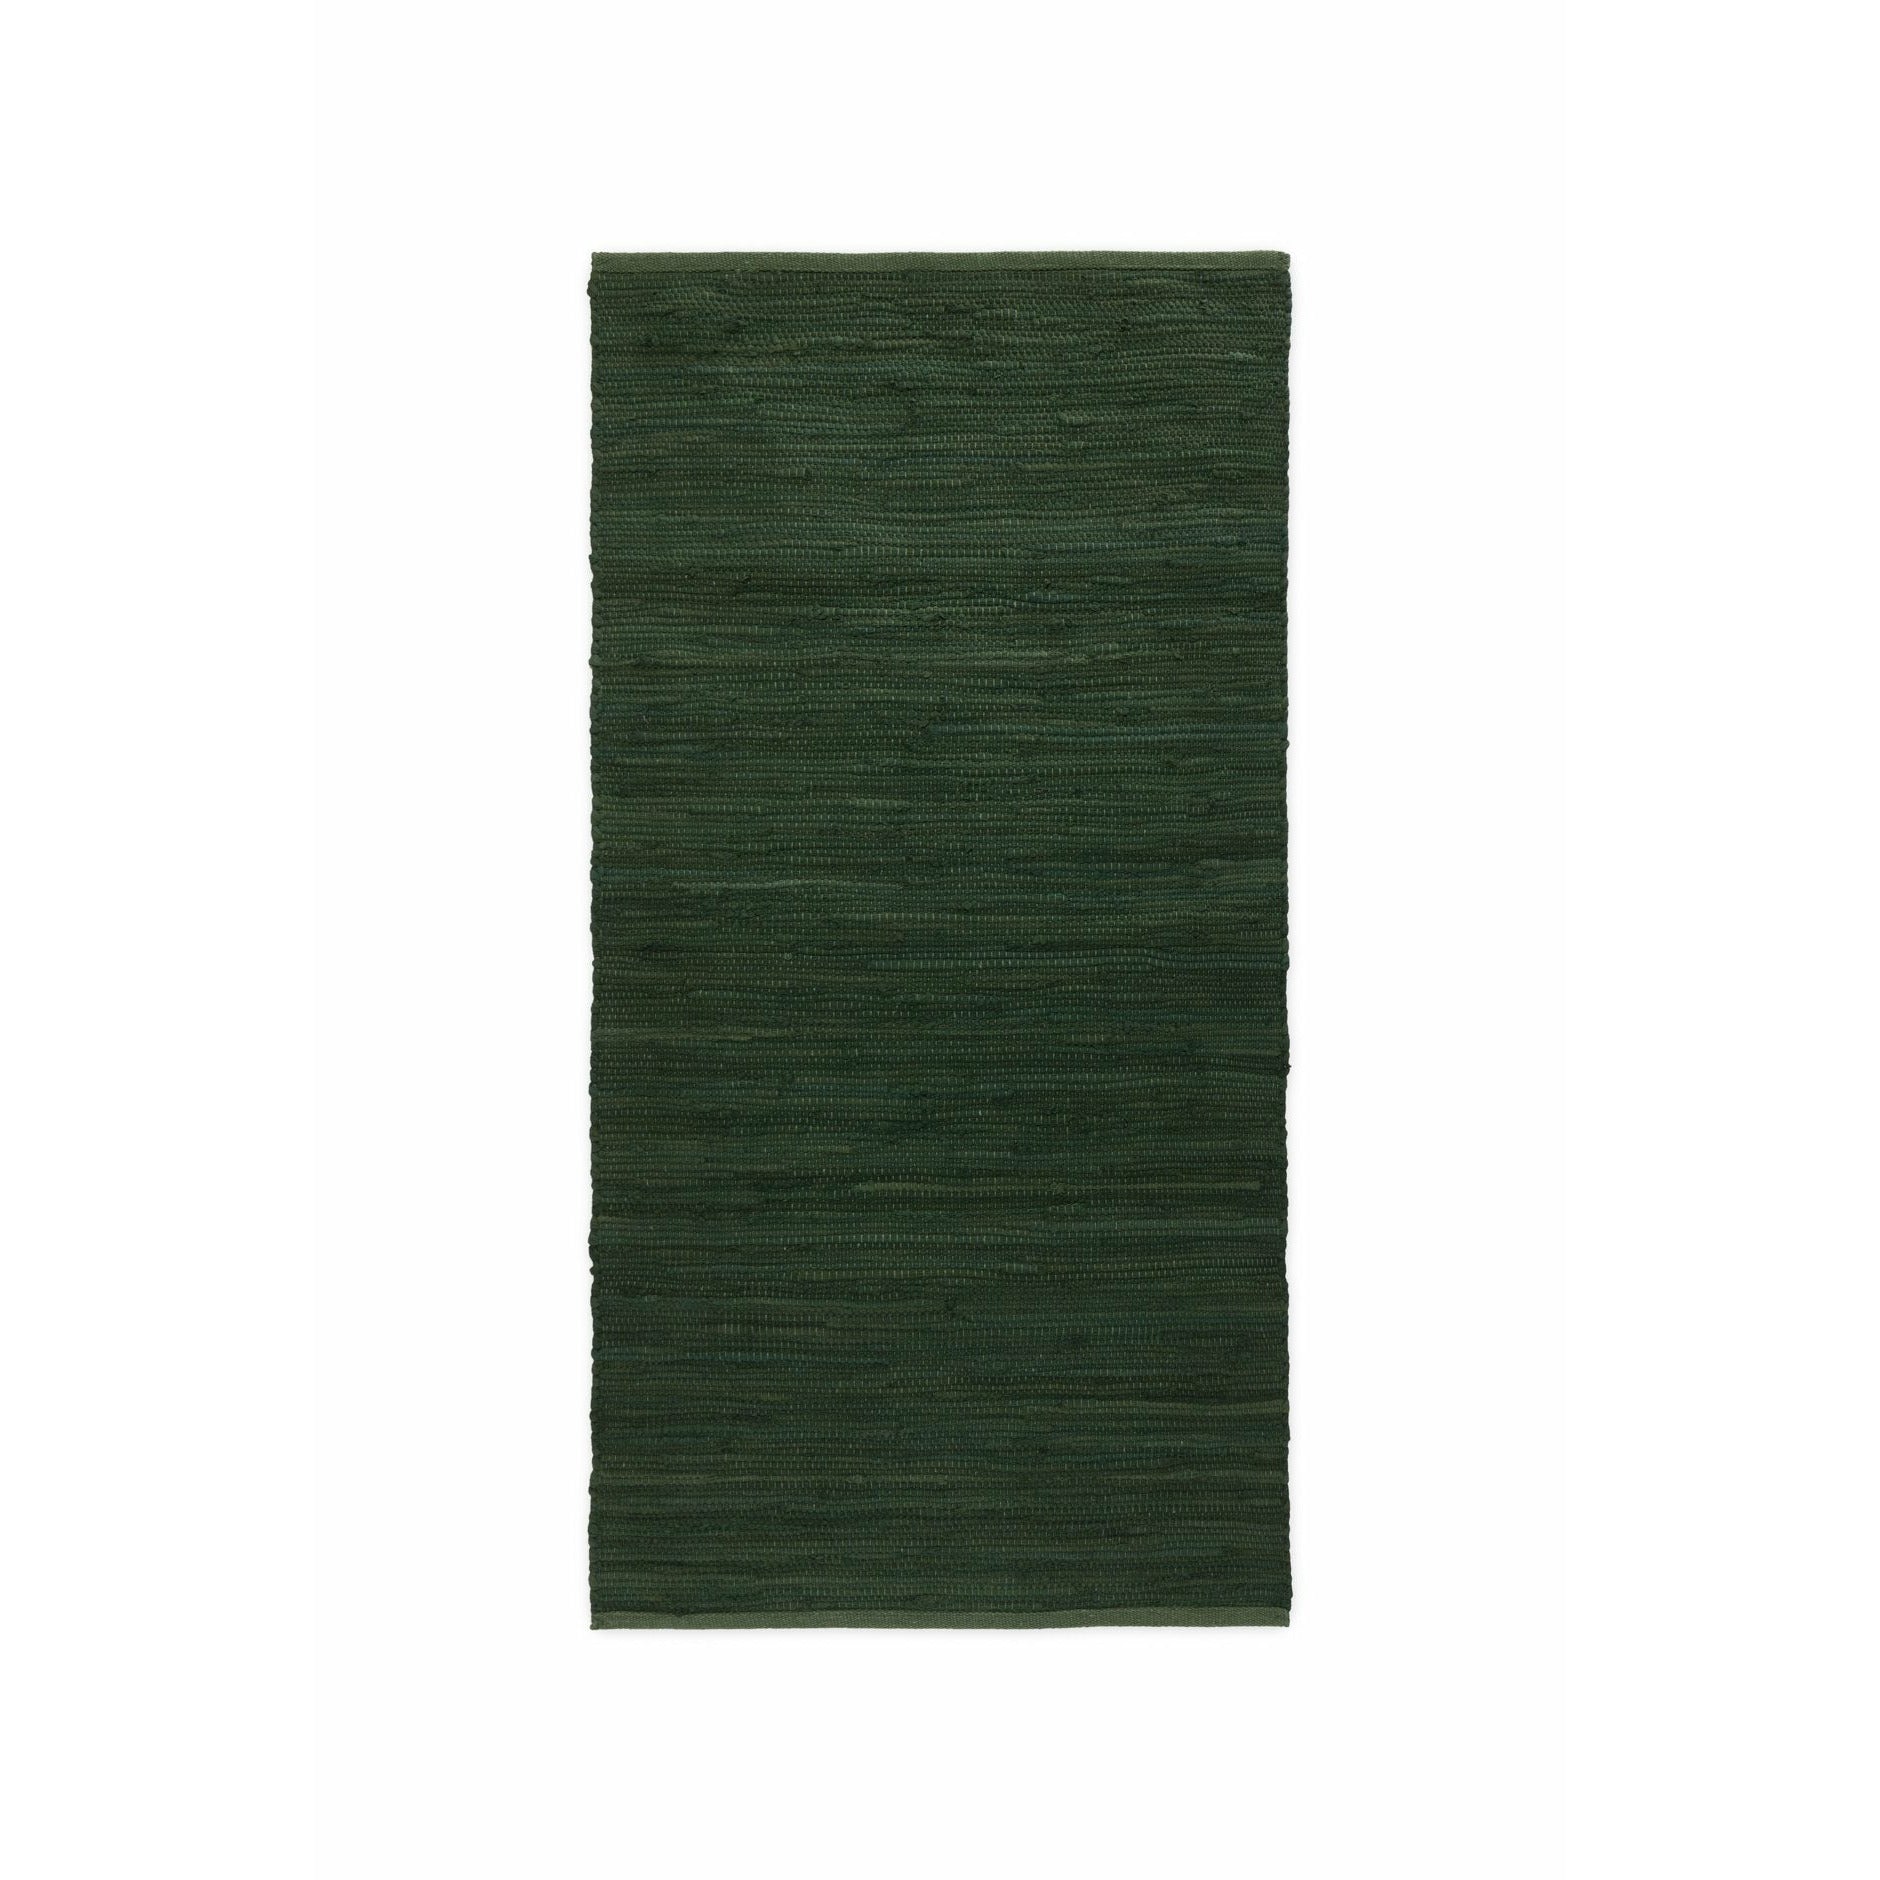 Rug Solid Cotton Teppich Guilty Green, 65 x 135 cm-Teppiche-Rug Solid-5711655202767-20276-RUG-inwohn